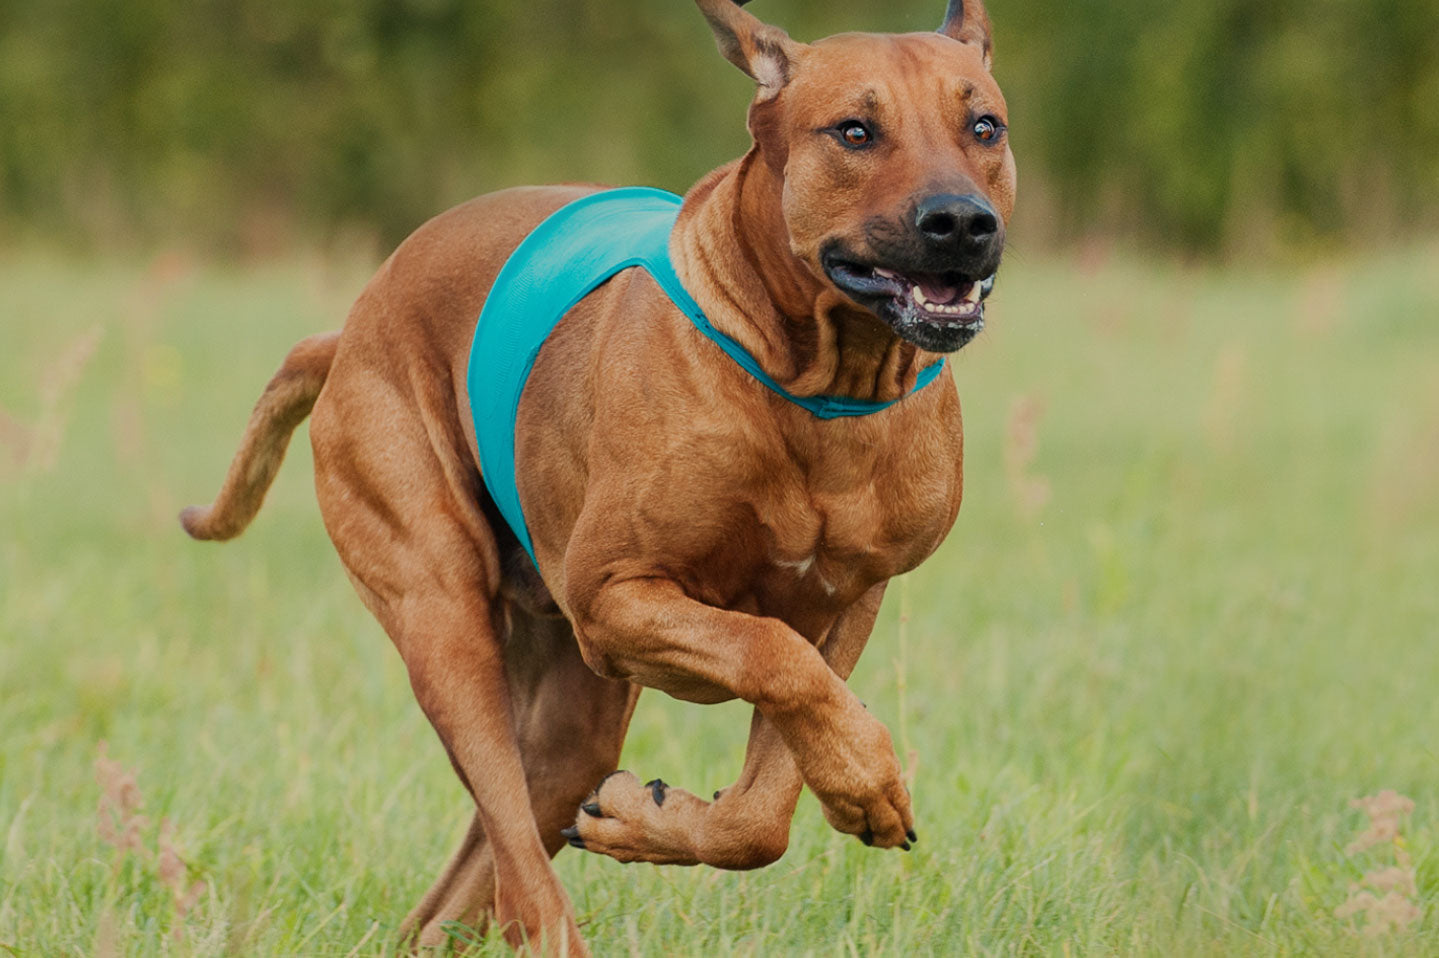 running muscular dog in grassy field with blue harness on